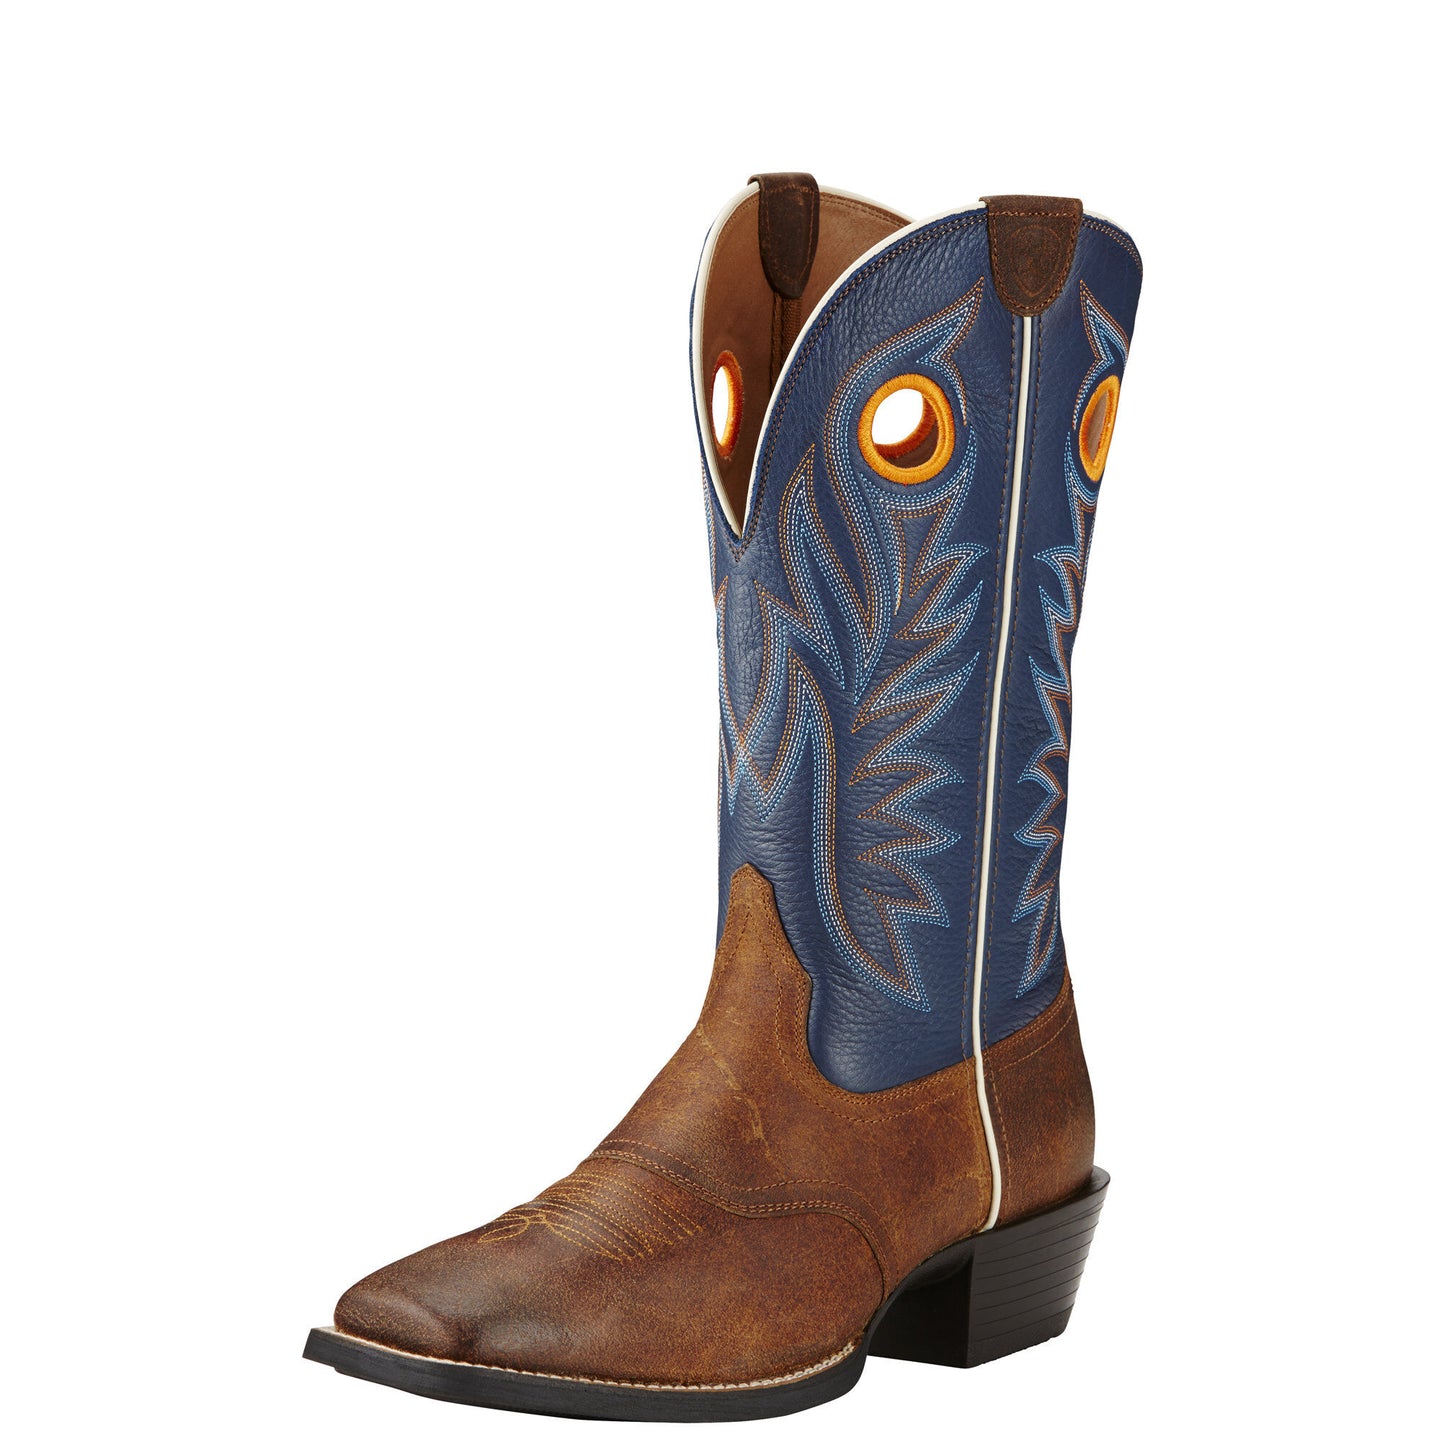 Ariat Men's Sport Outrider Boot - Pinecone/Federal Blue - French's Boots